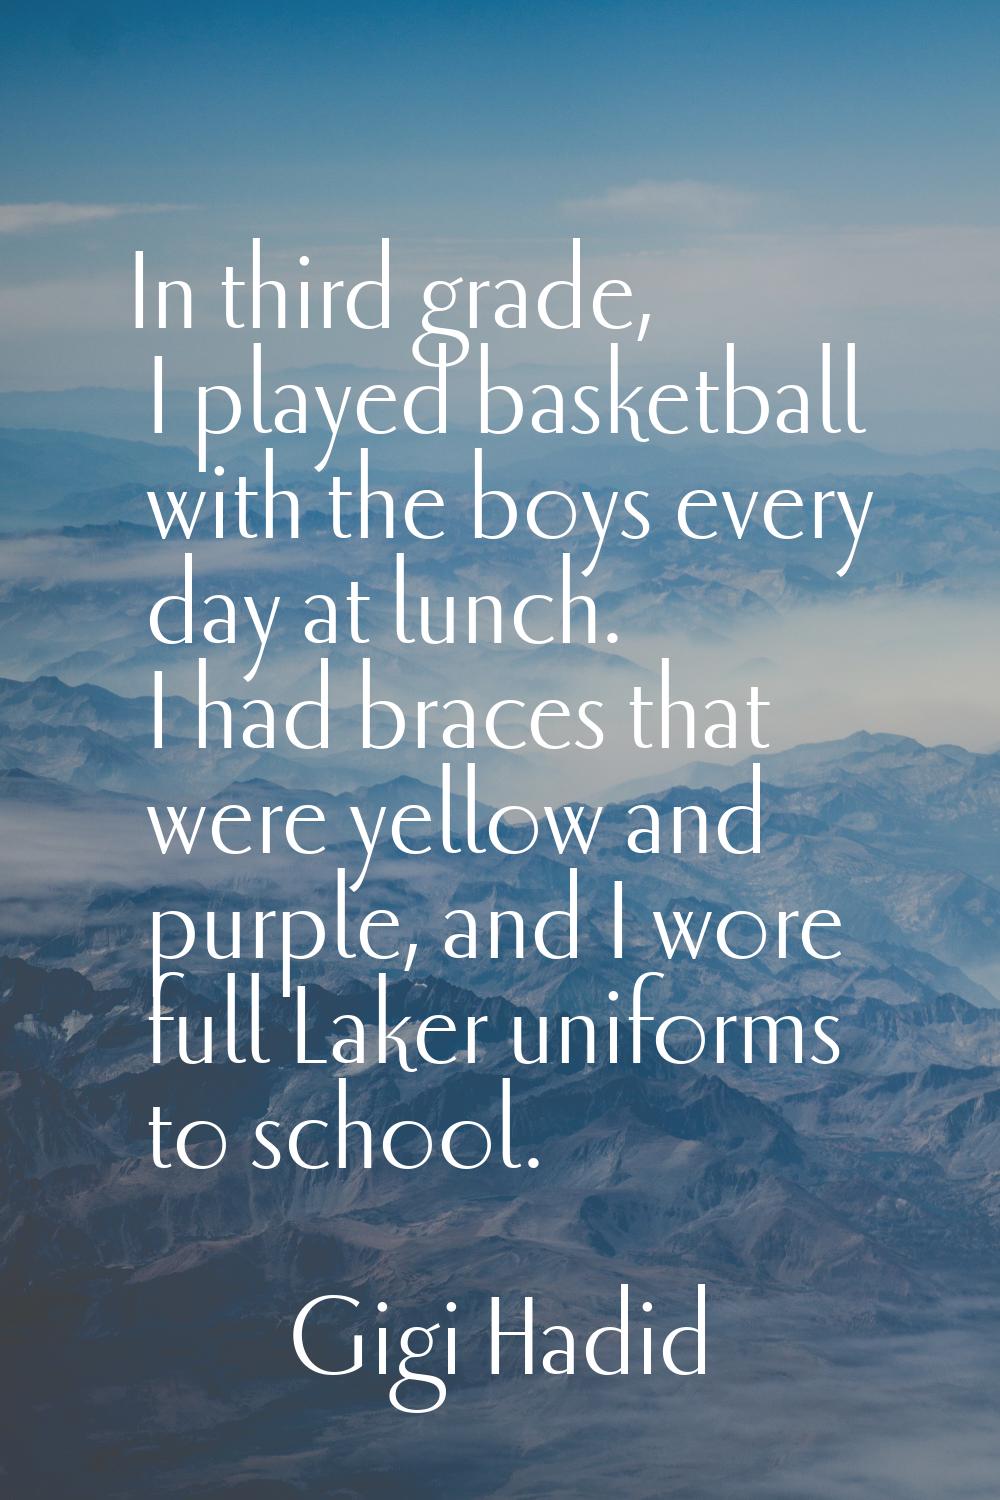 In third grade, I played basketball with the boys every day at lunch. I had braces that were yellow